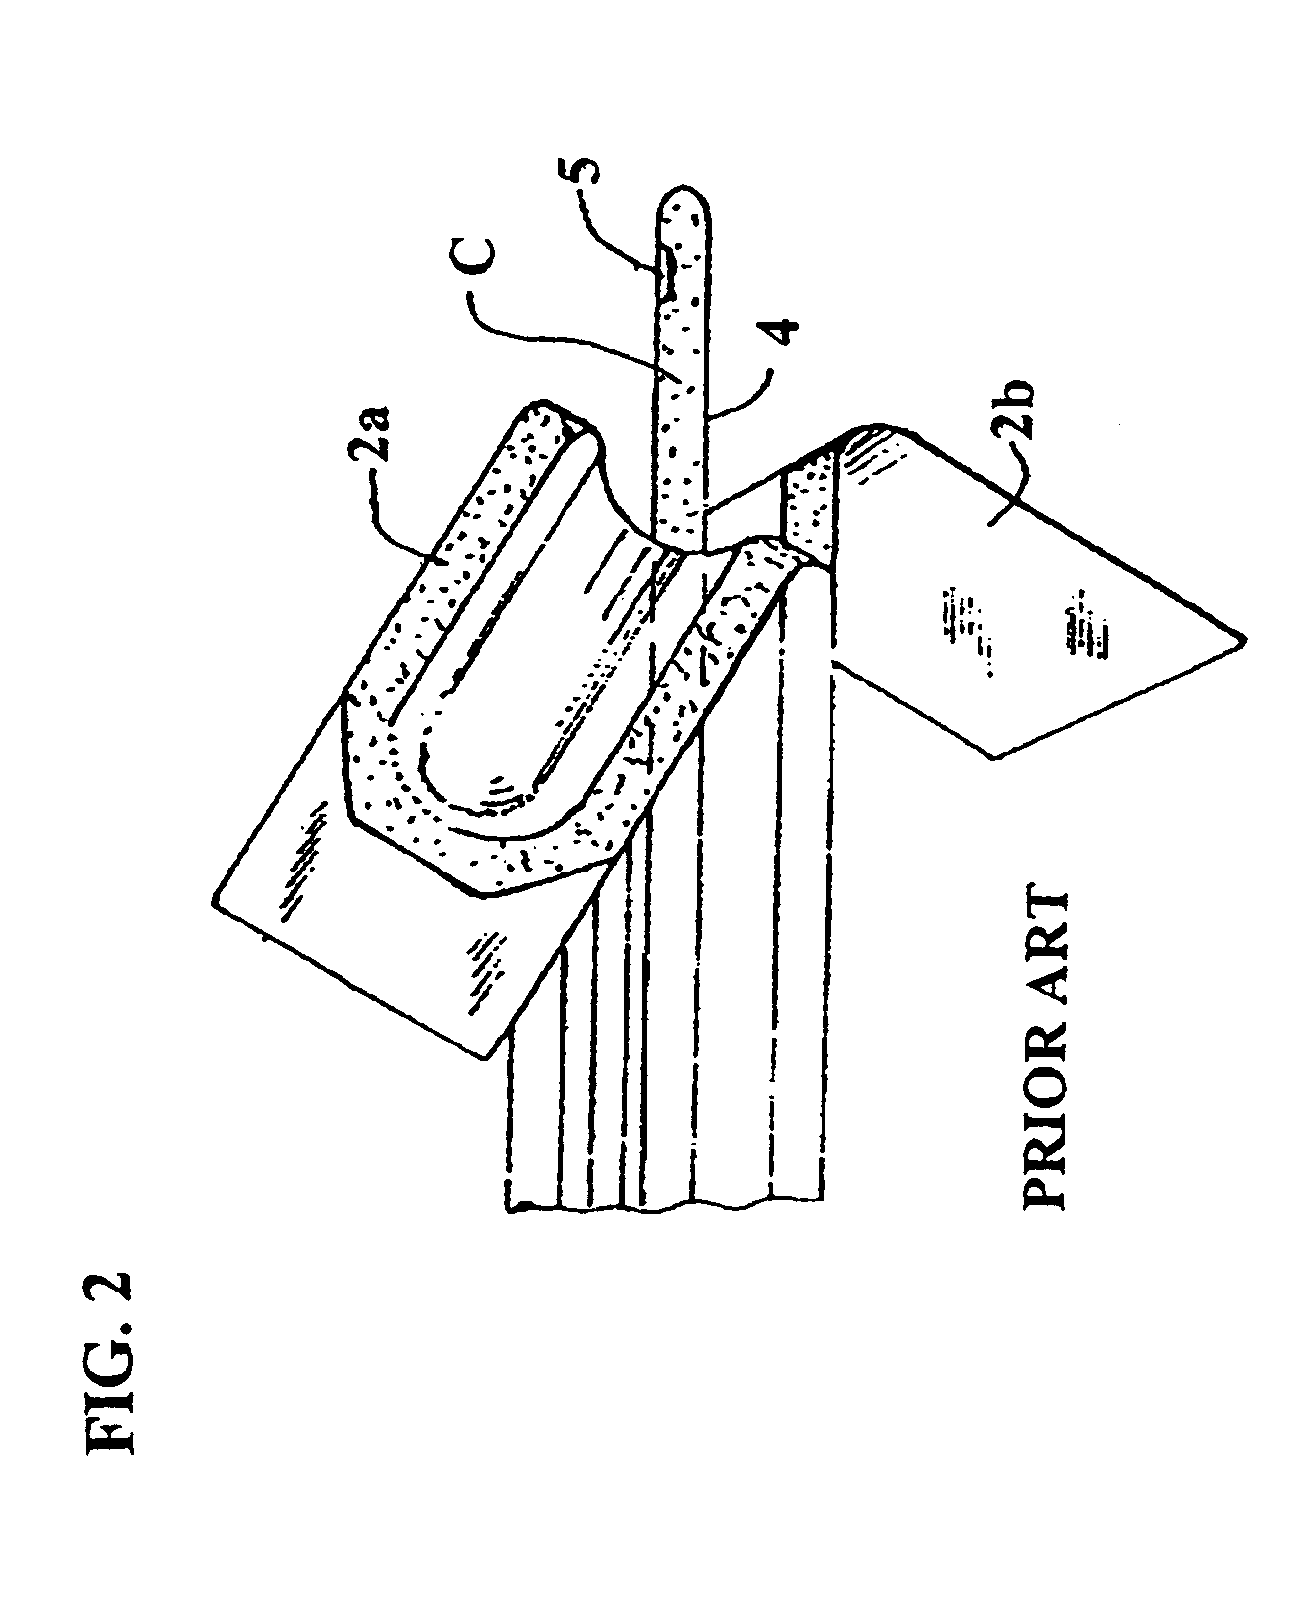 Catheter assembly/package utilizing a hydrating/hydrogel sleeve and a foil outer layer and method of making and using the same